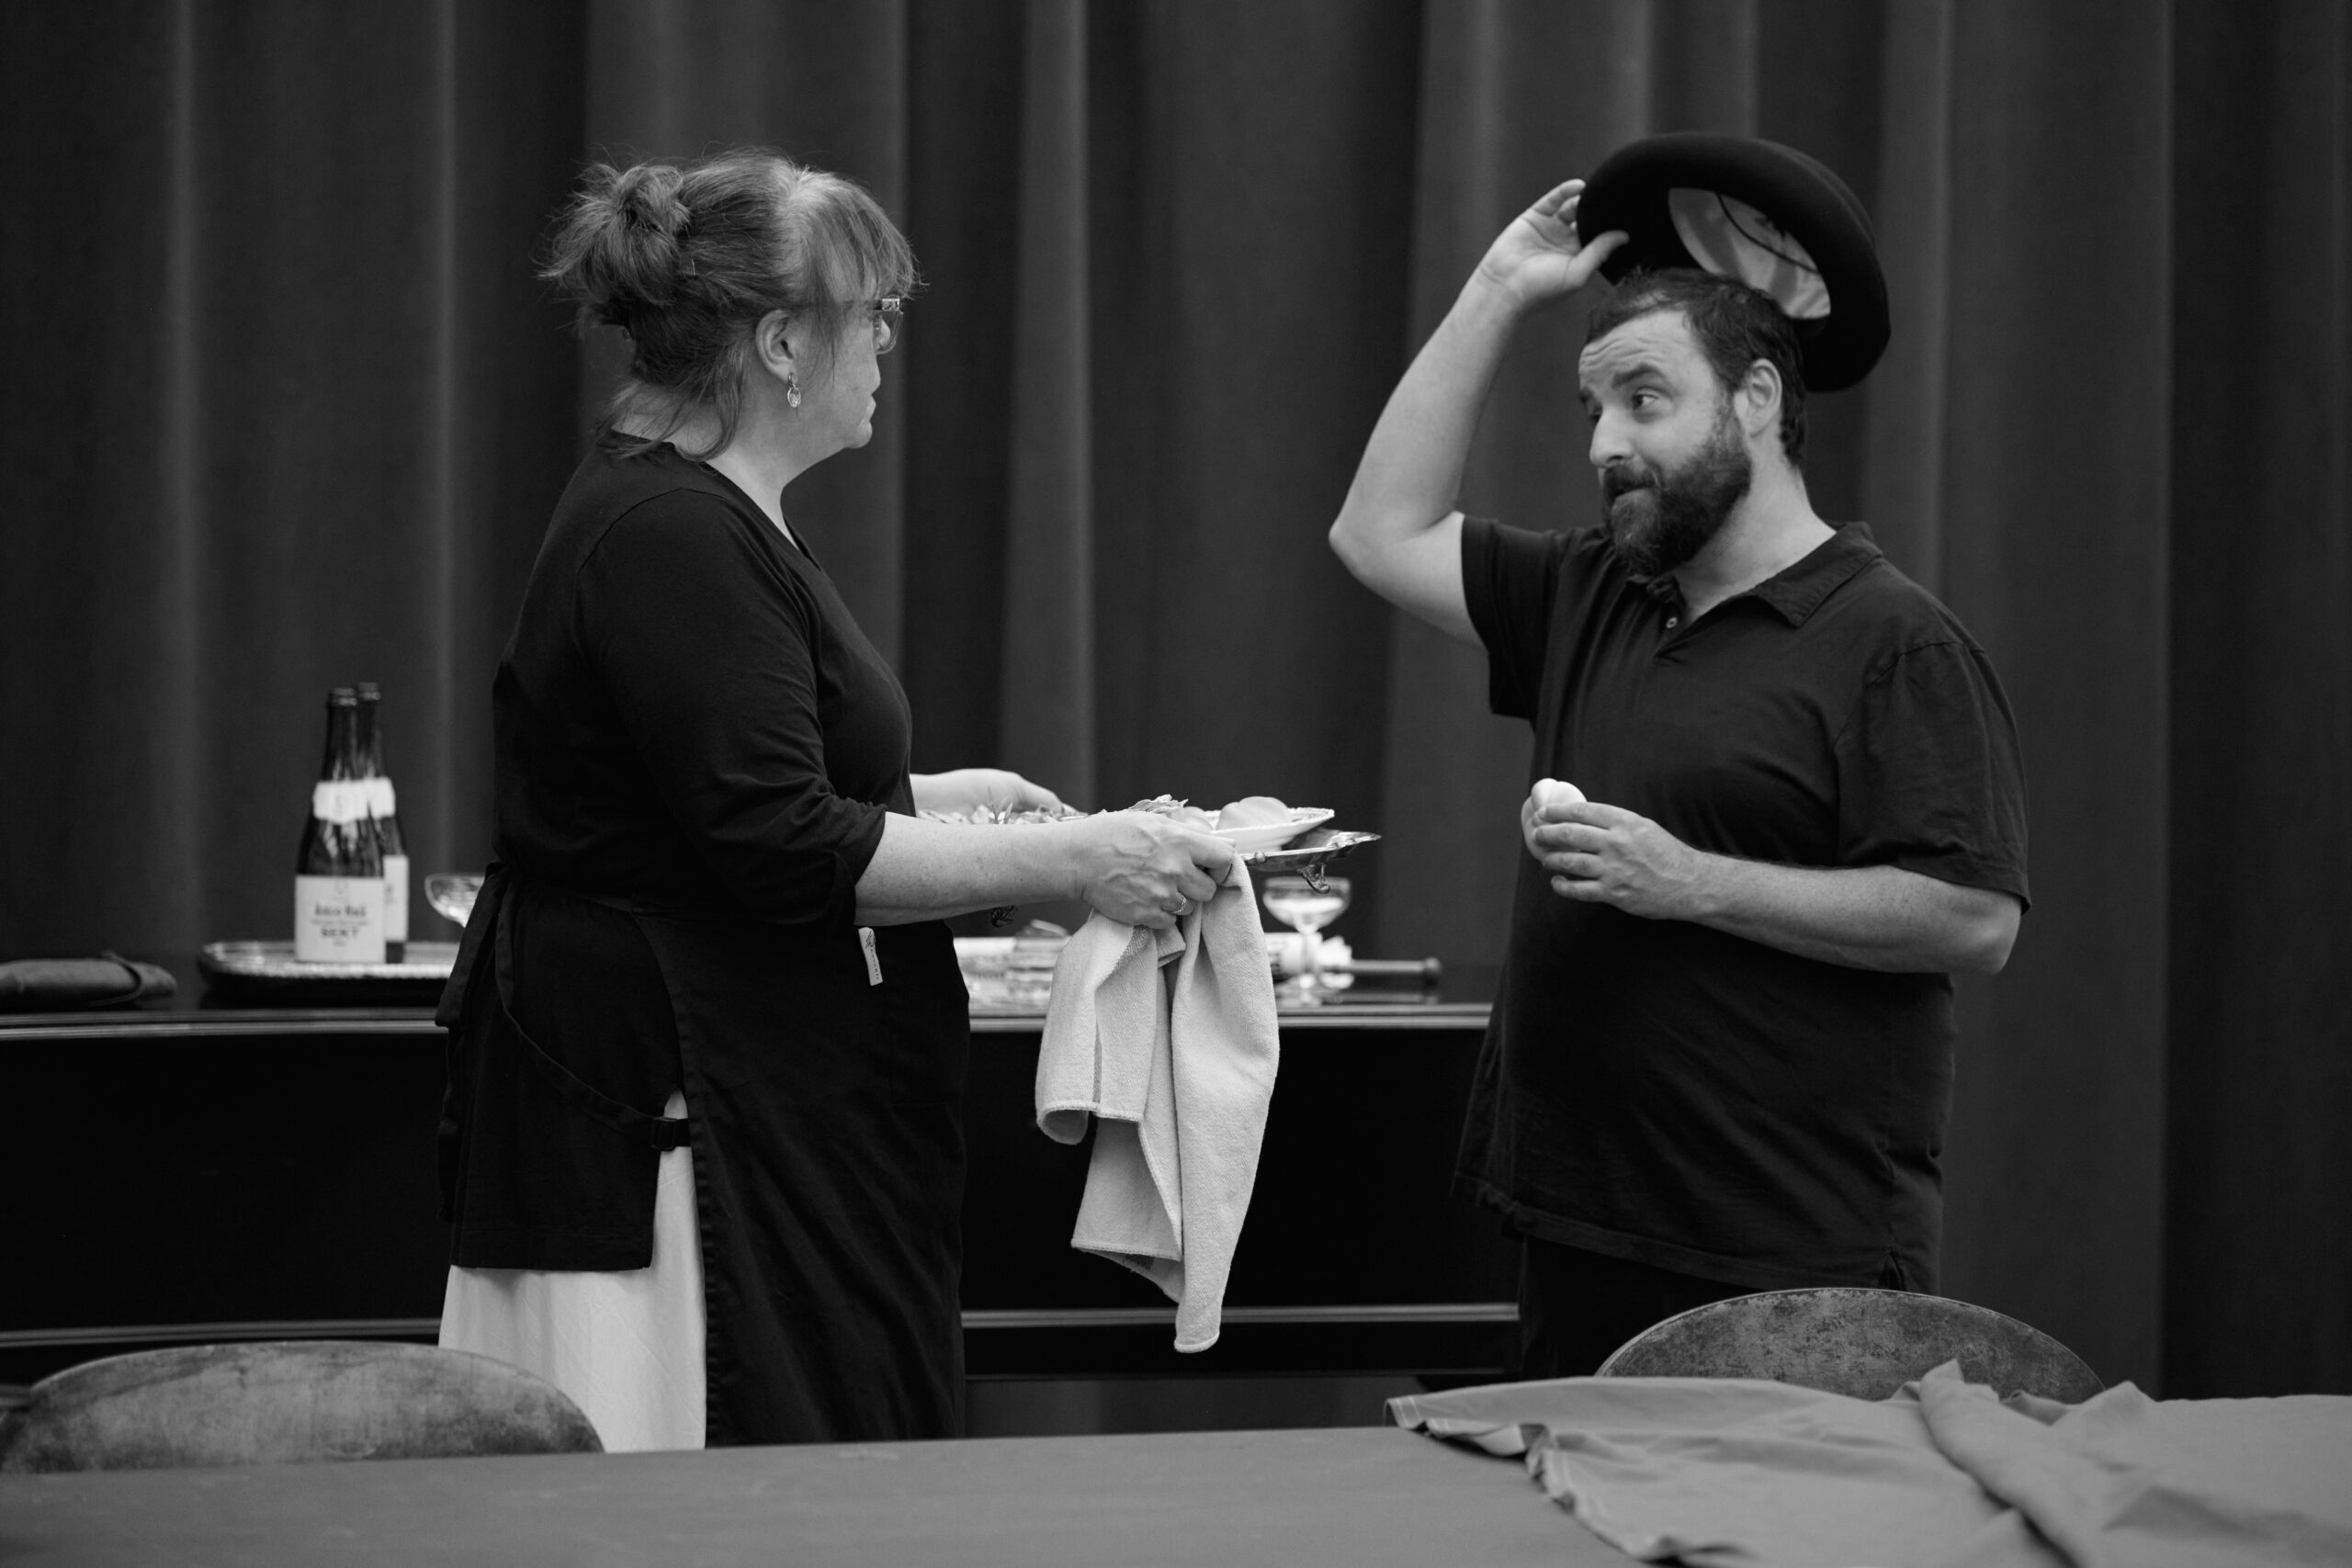 Gina Ferrall and David Krumholtz in rehearsals for Leopoldstadt. Photo by Jenny Anderson.